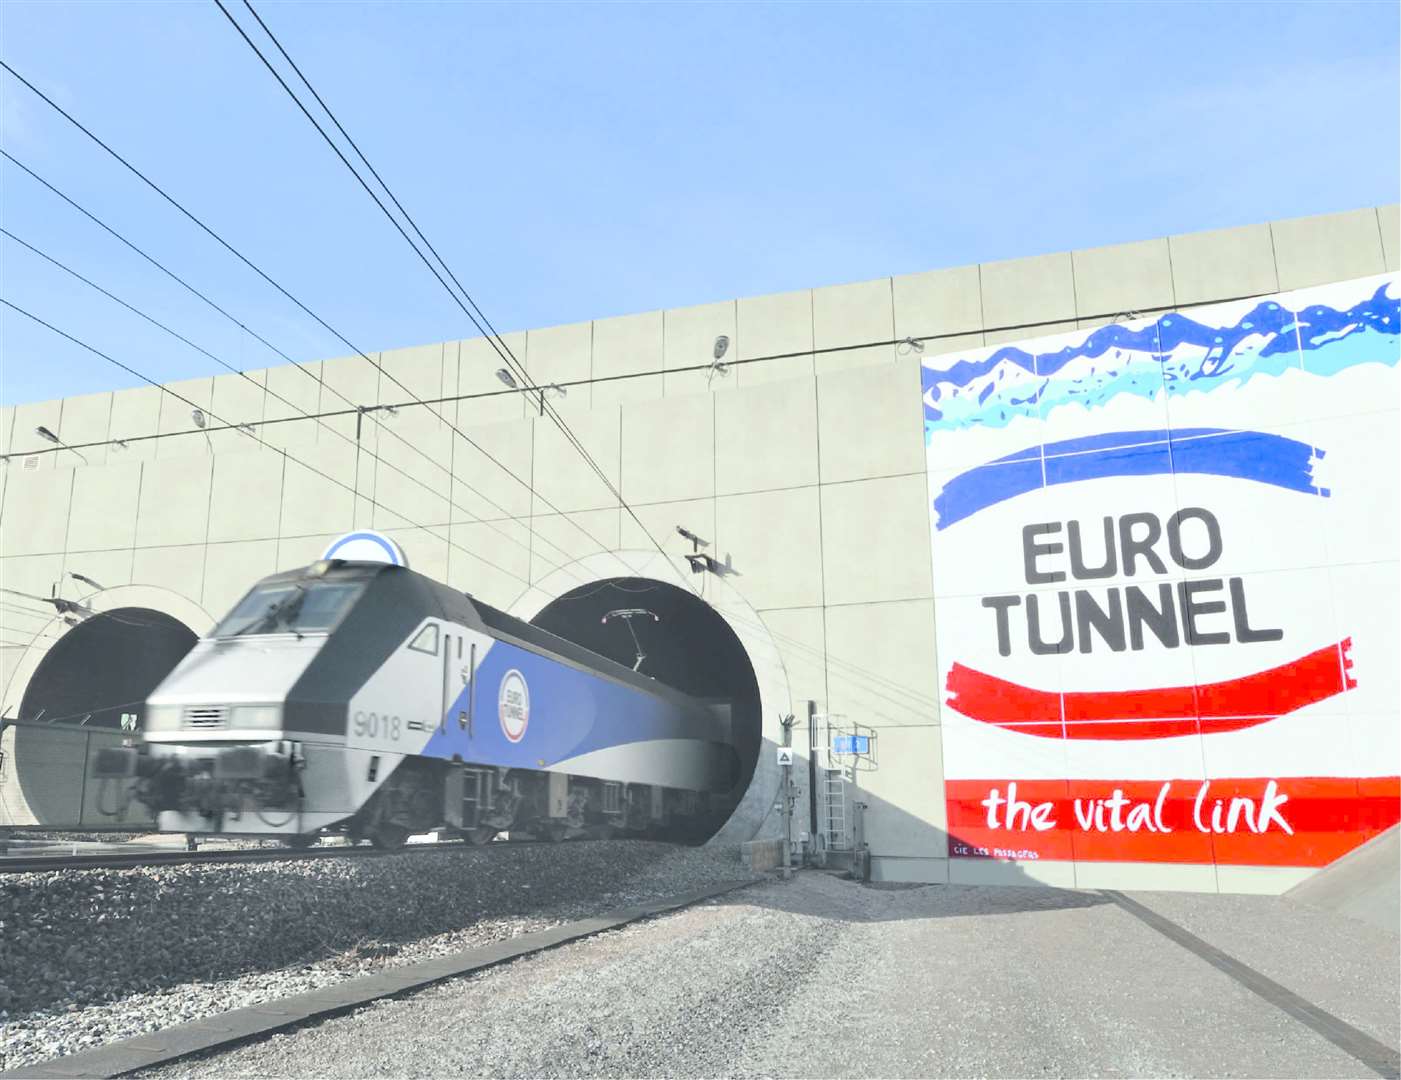 Eurotunnel was awarded a £33m payout after challenging the way the government issued contracts to ferry firms as part of the no deal Brexit plans